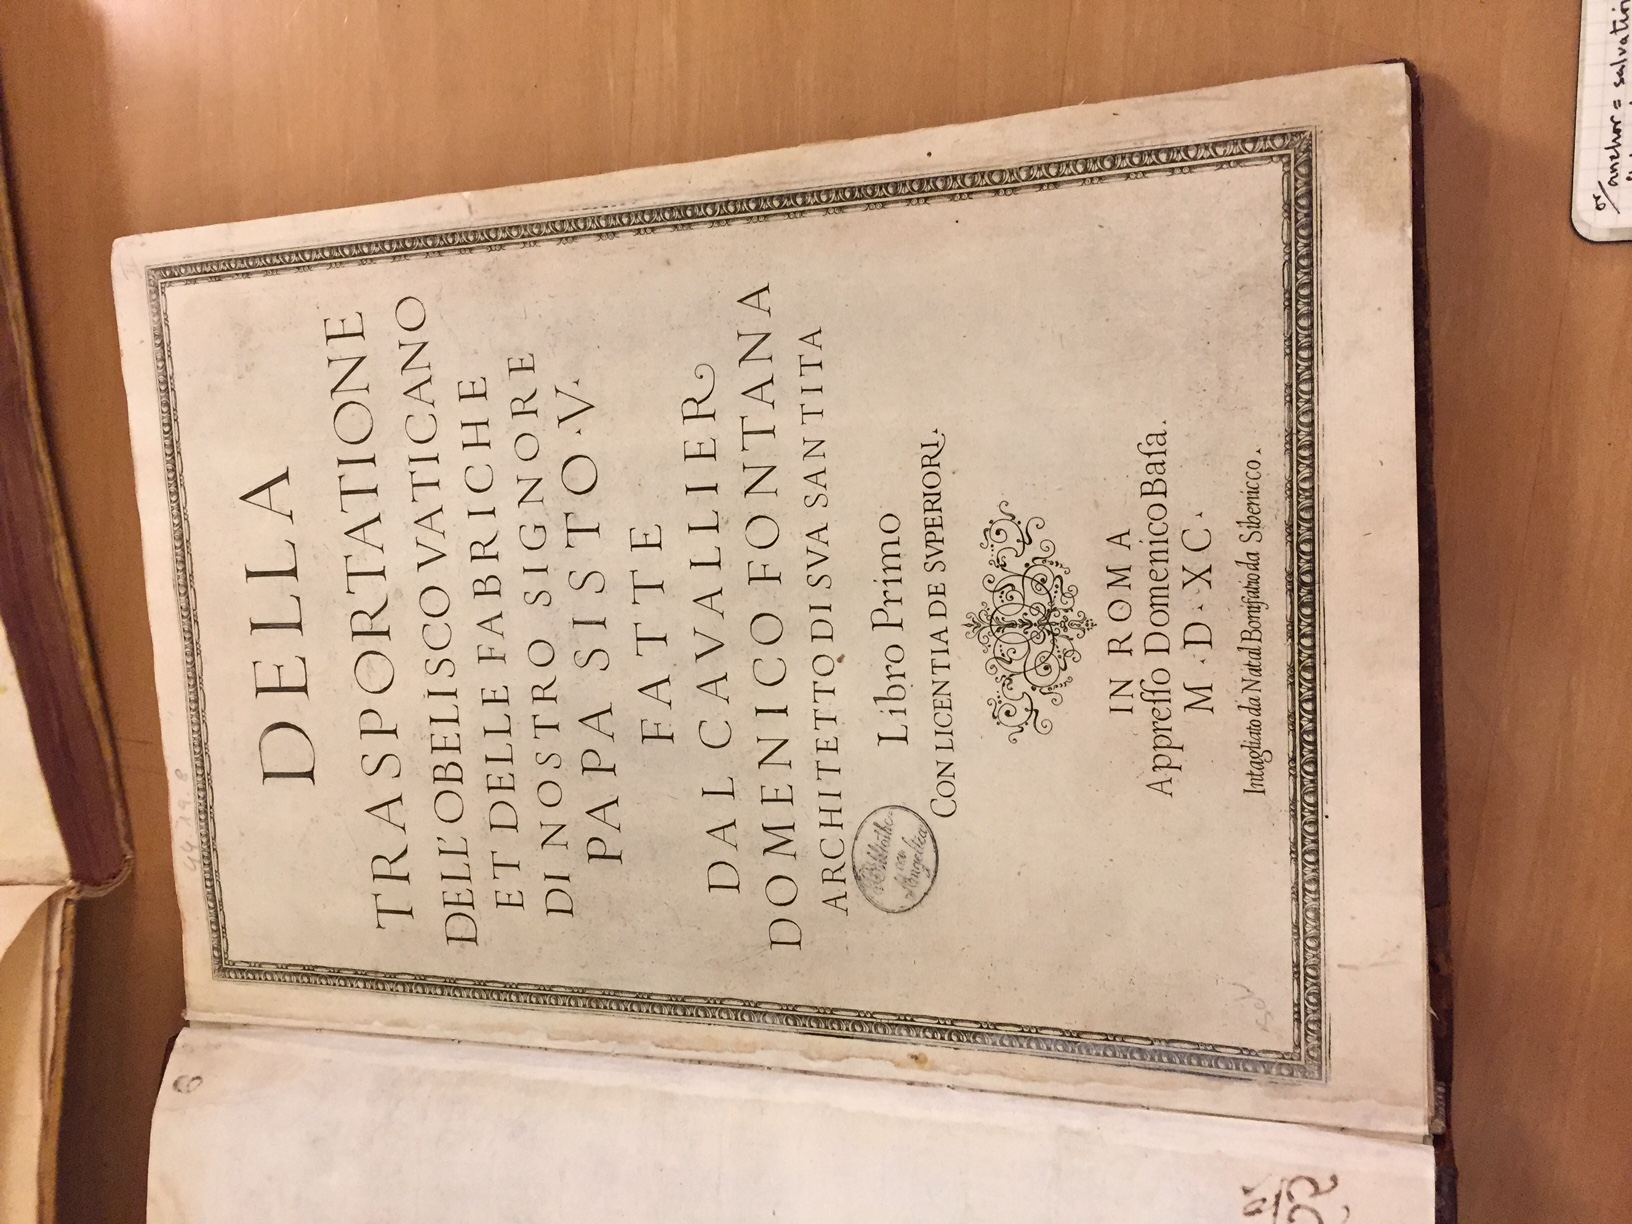 Text written on the cover of an old book.